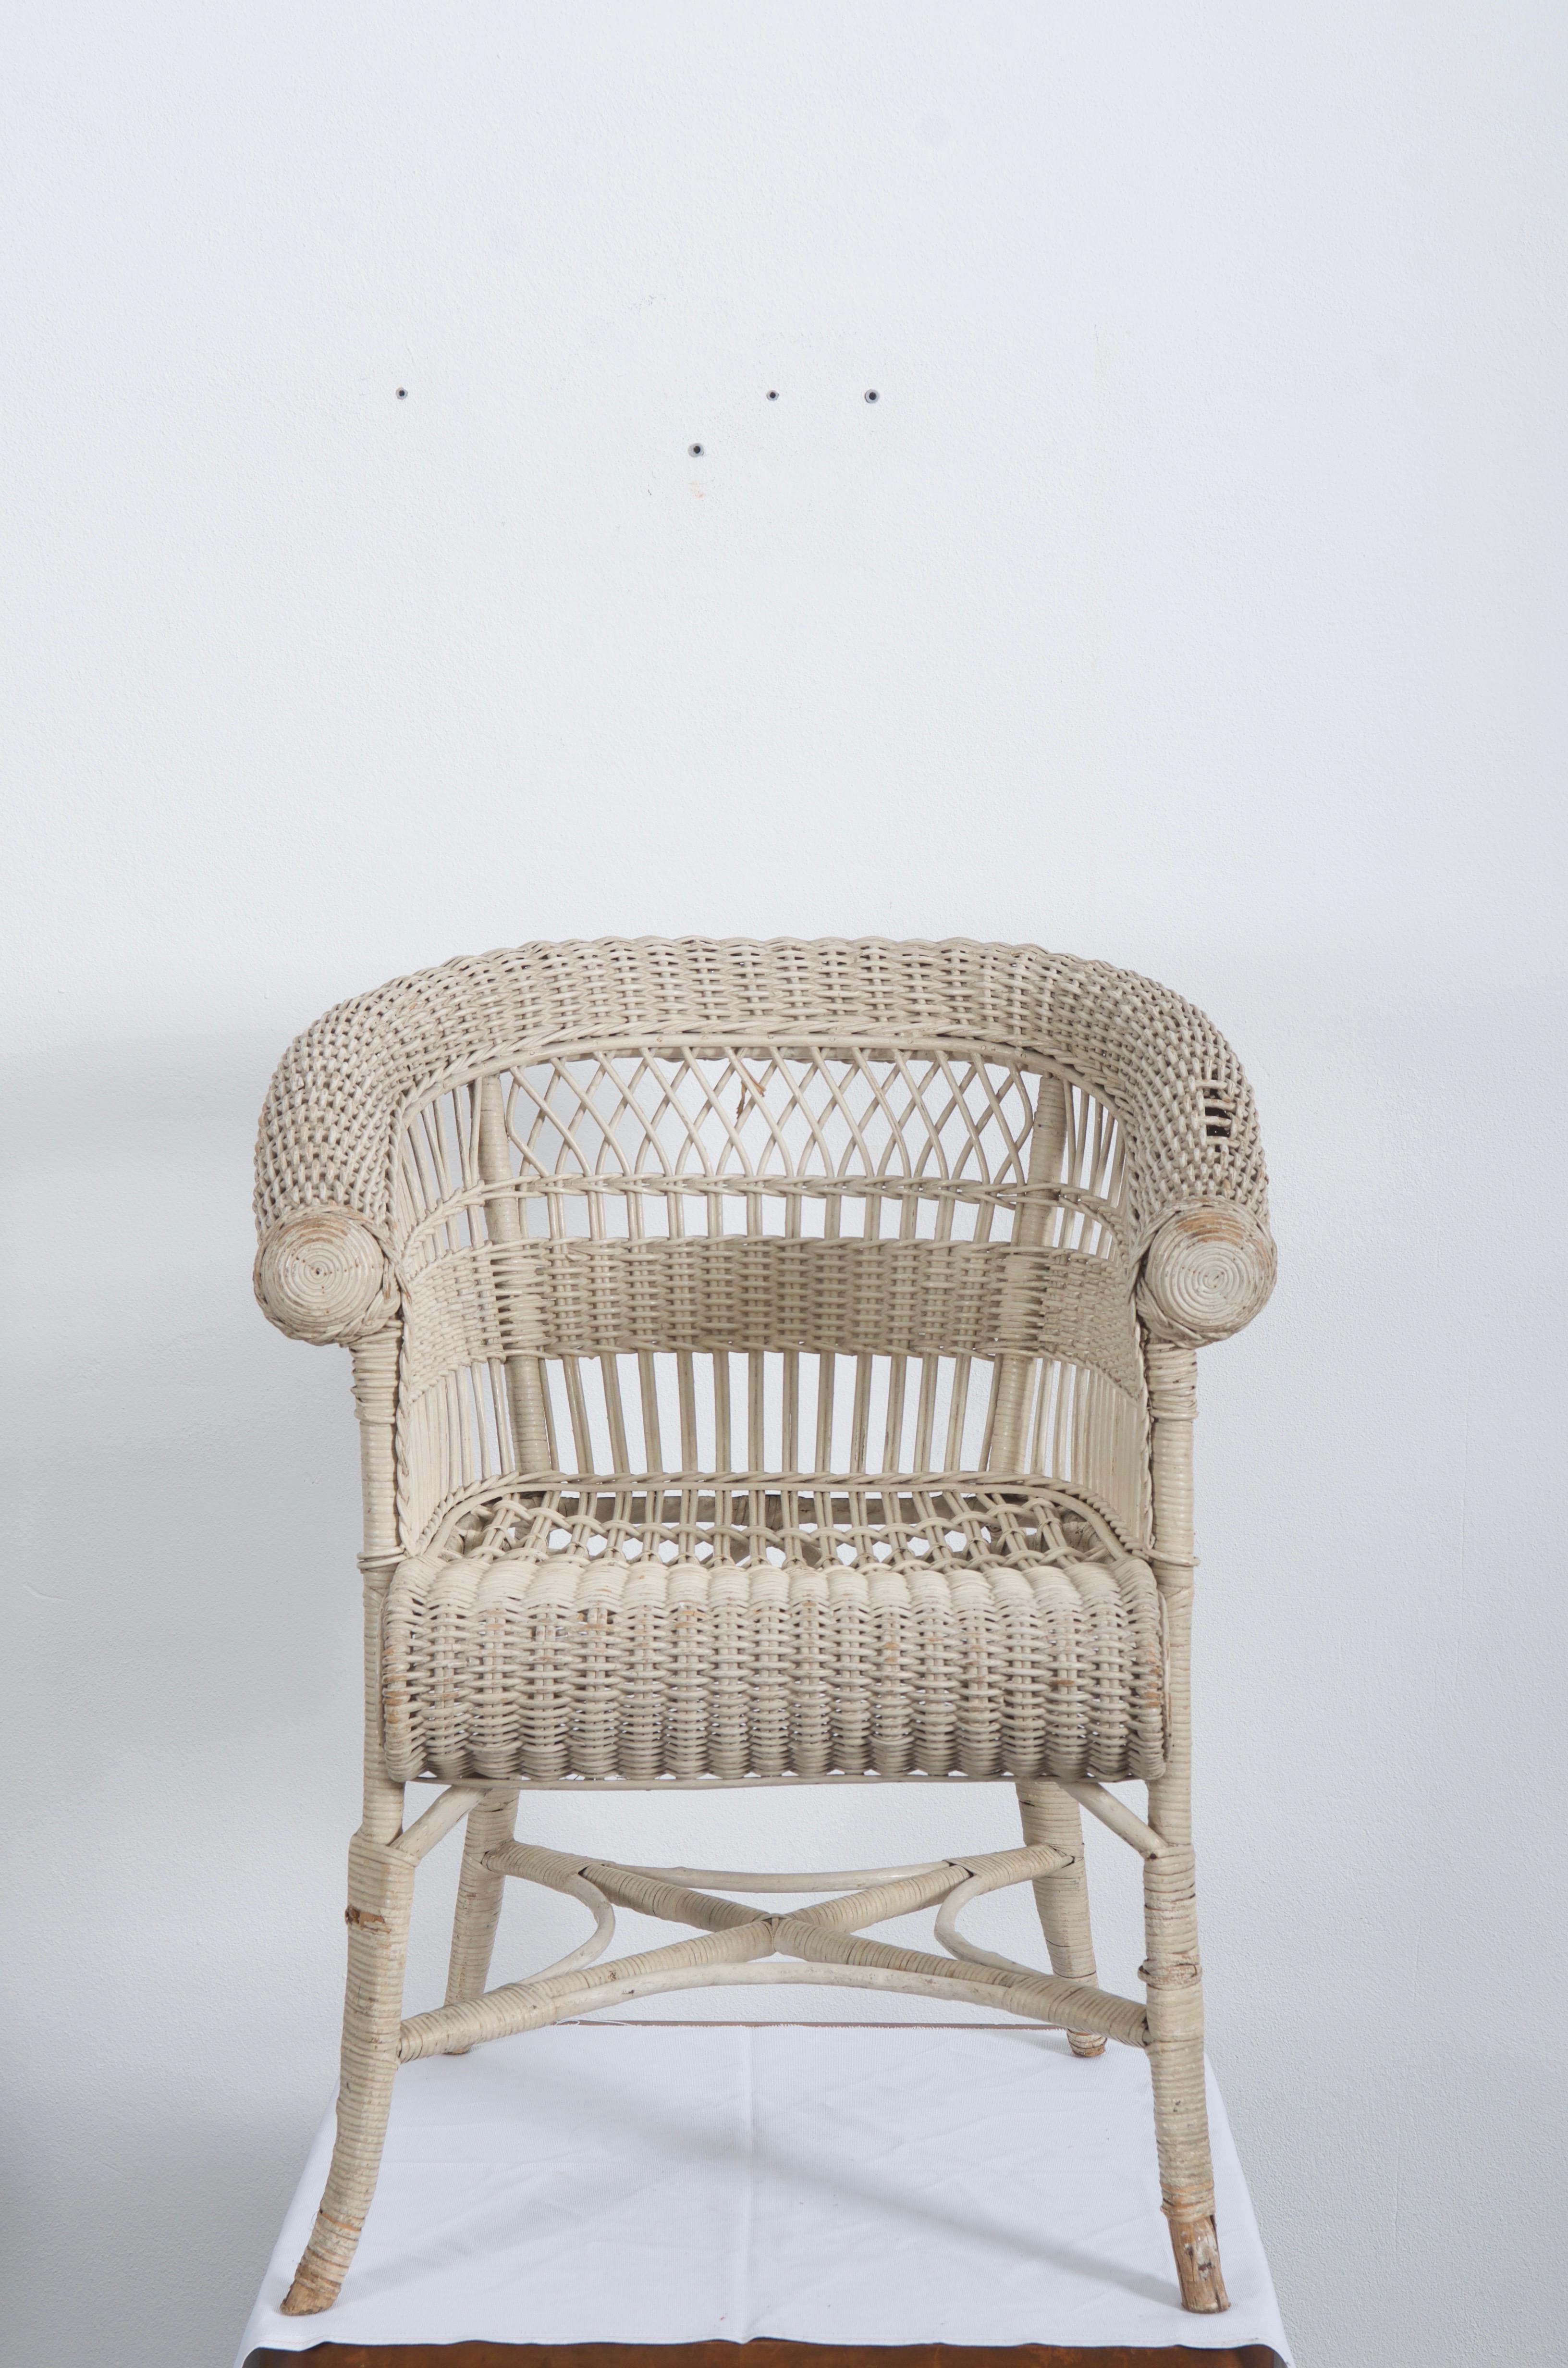 Rare Vienna Secession Wicker Armchairs by Hans Vollmer for Prag-Rudniker For Sale 6